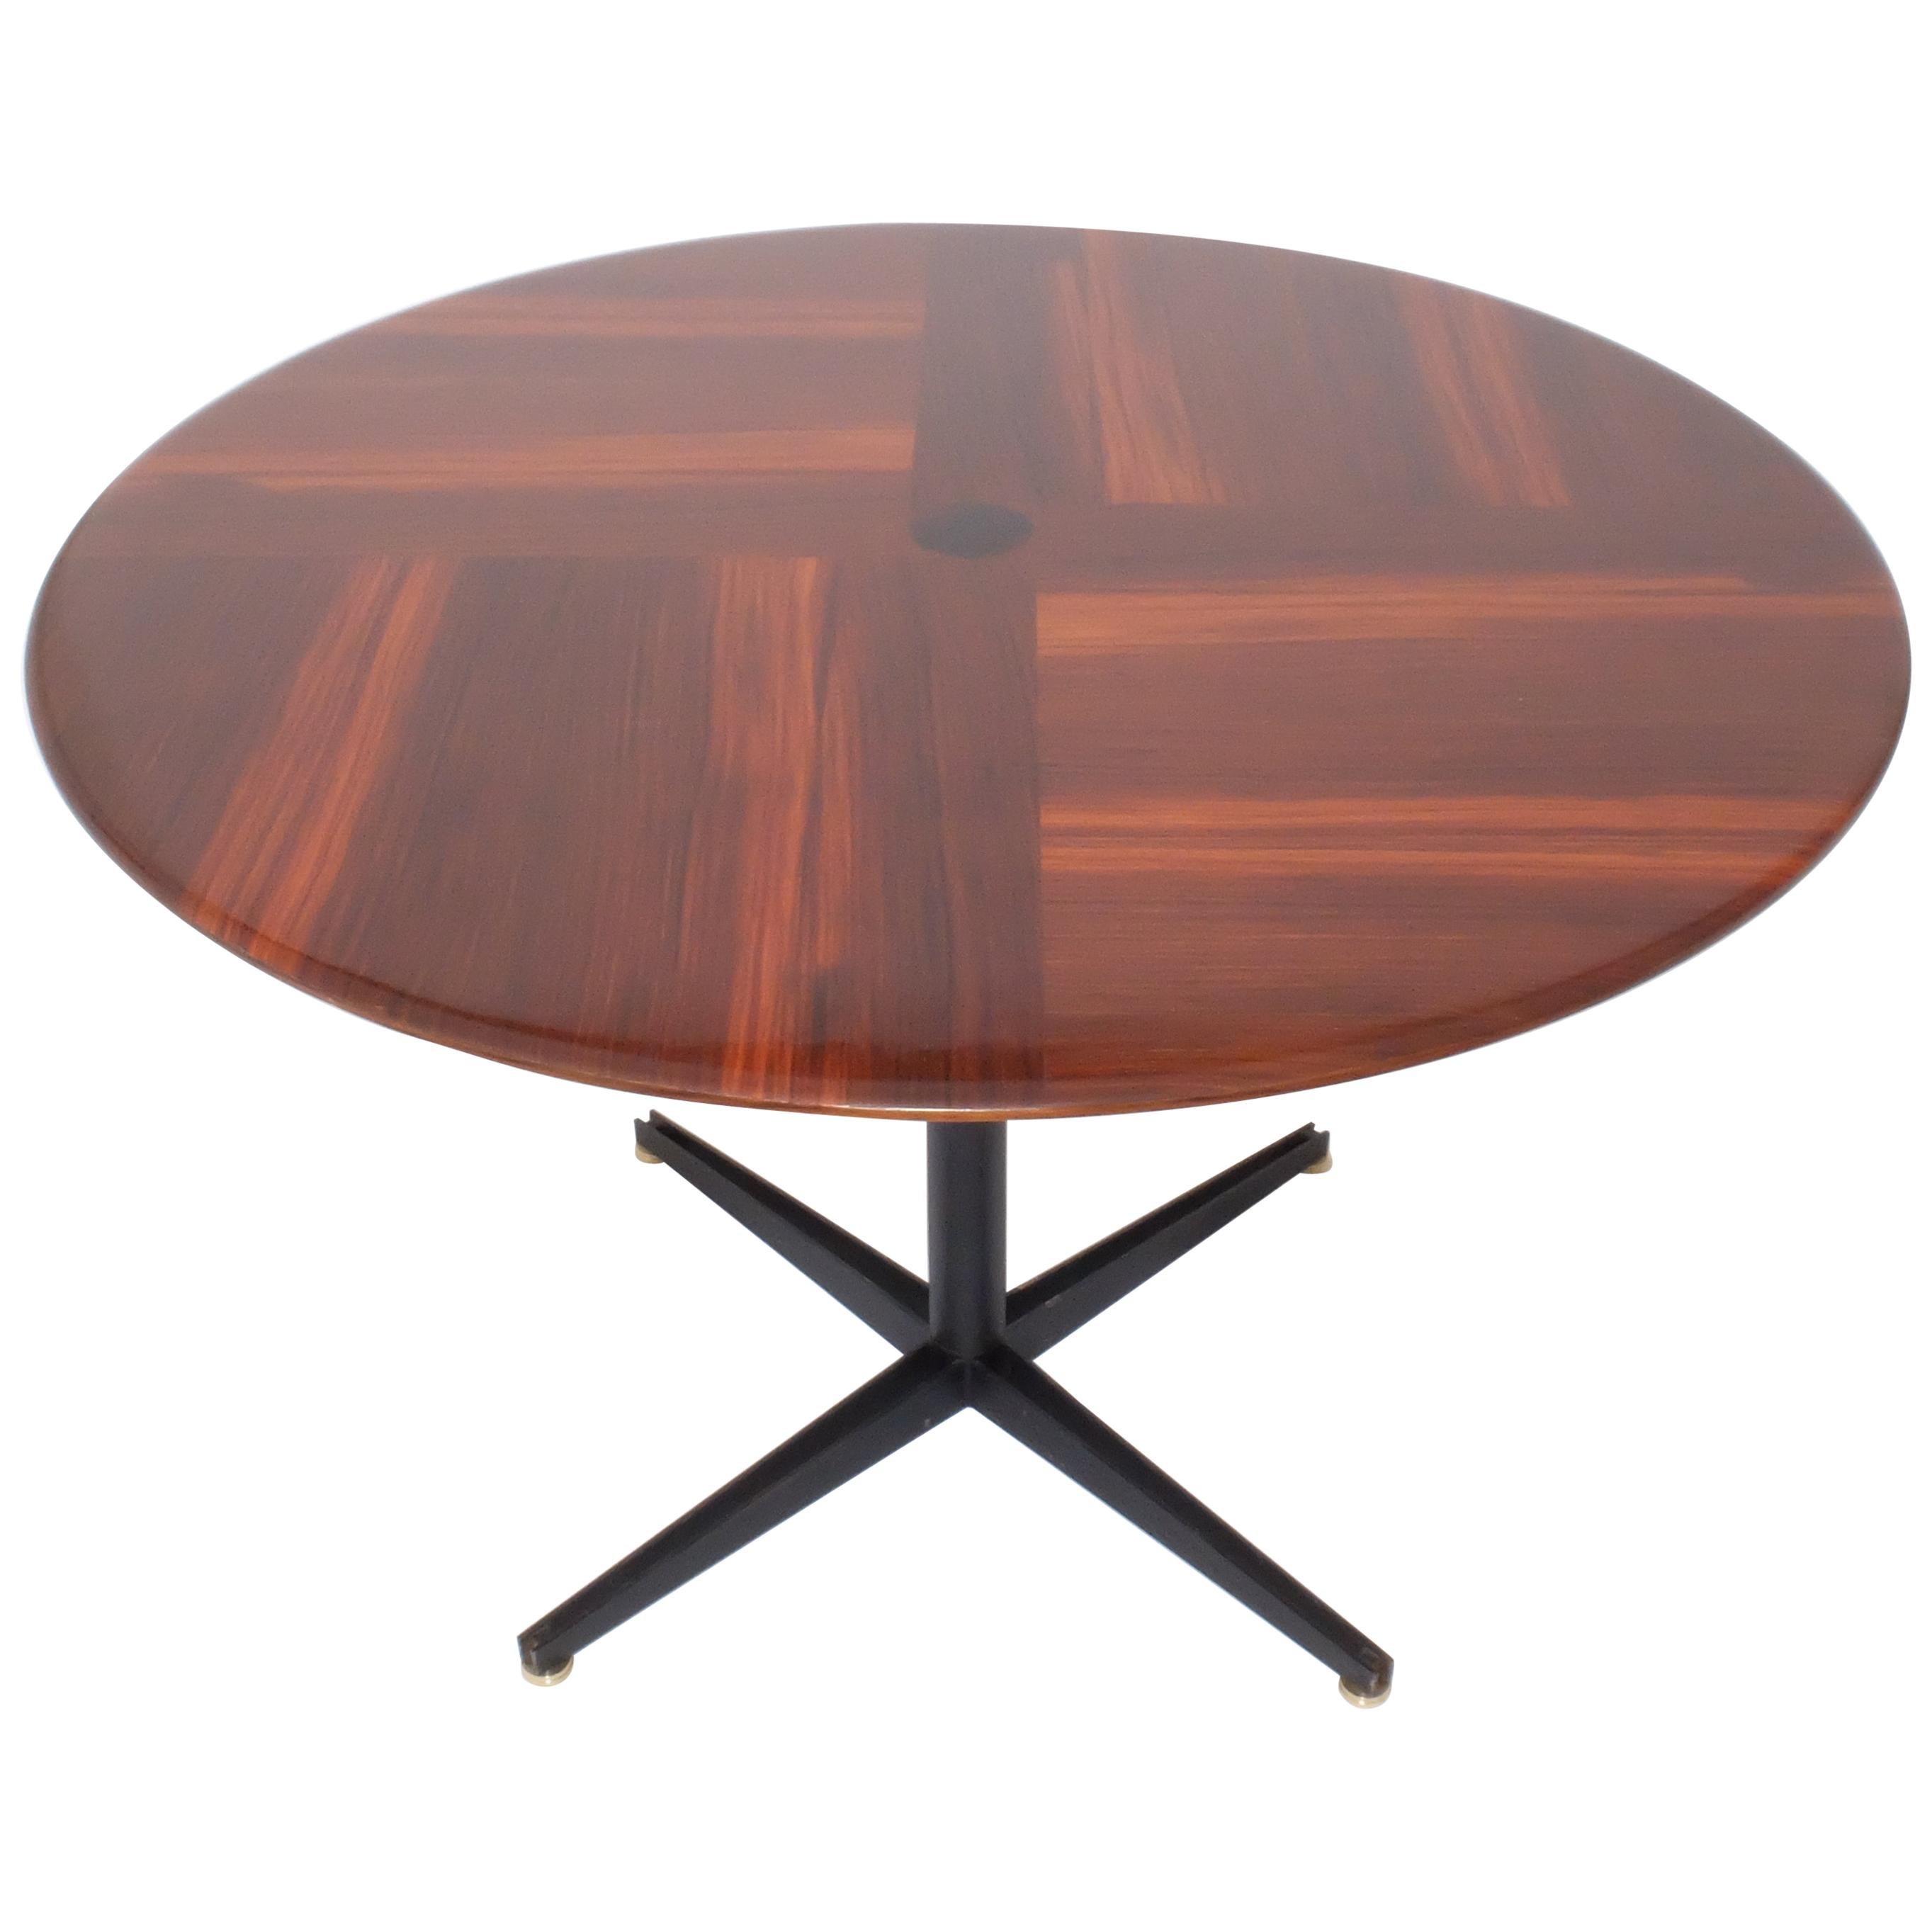 Borsani Adjustable Height Rosewood Table by Tecno T41, Dining or Coffee Table